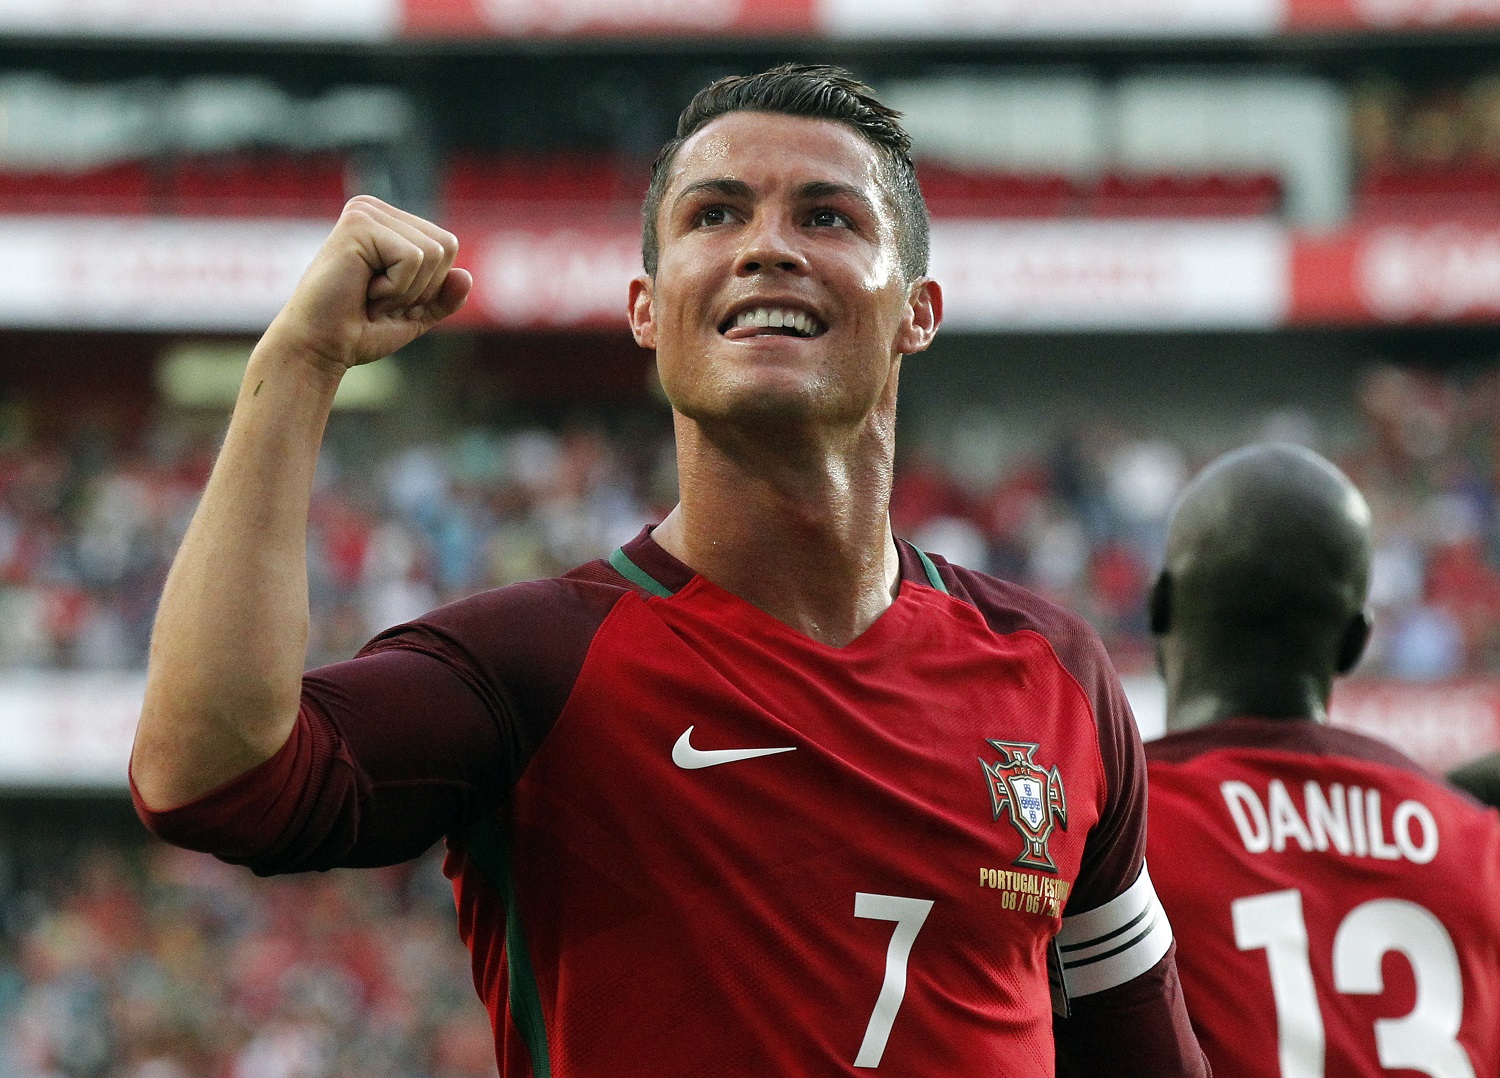 Portugal's Cristiano Ronaldo celebrates after scoring against Estonia during their friendly soccer match at Benfica stadium in Lisbon, Wednesday, June 8 2016. Portugal will play in the Euro2016 in Group stage against Austria, Hungary and Iceland in Group F. (AP Photo/Steven Governo)